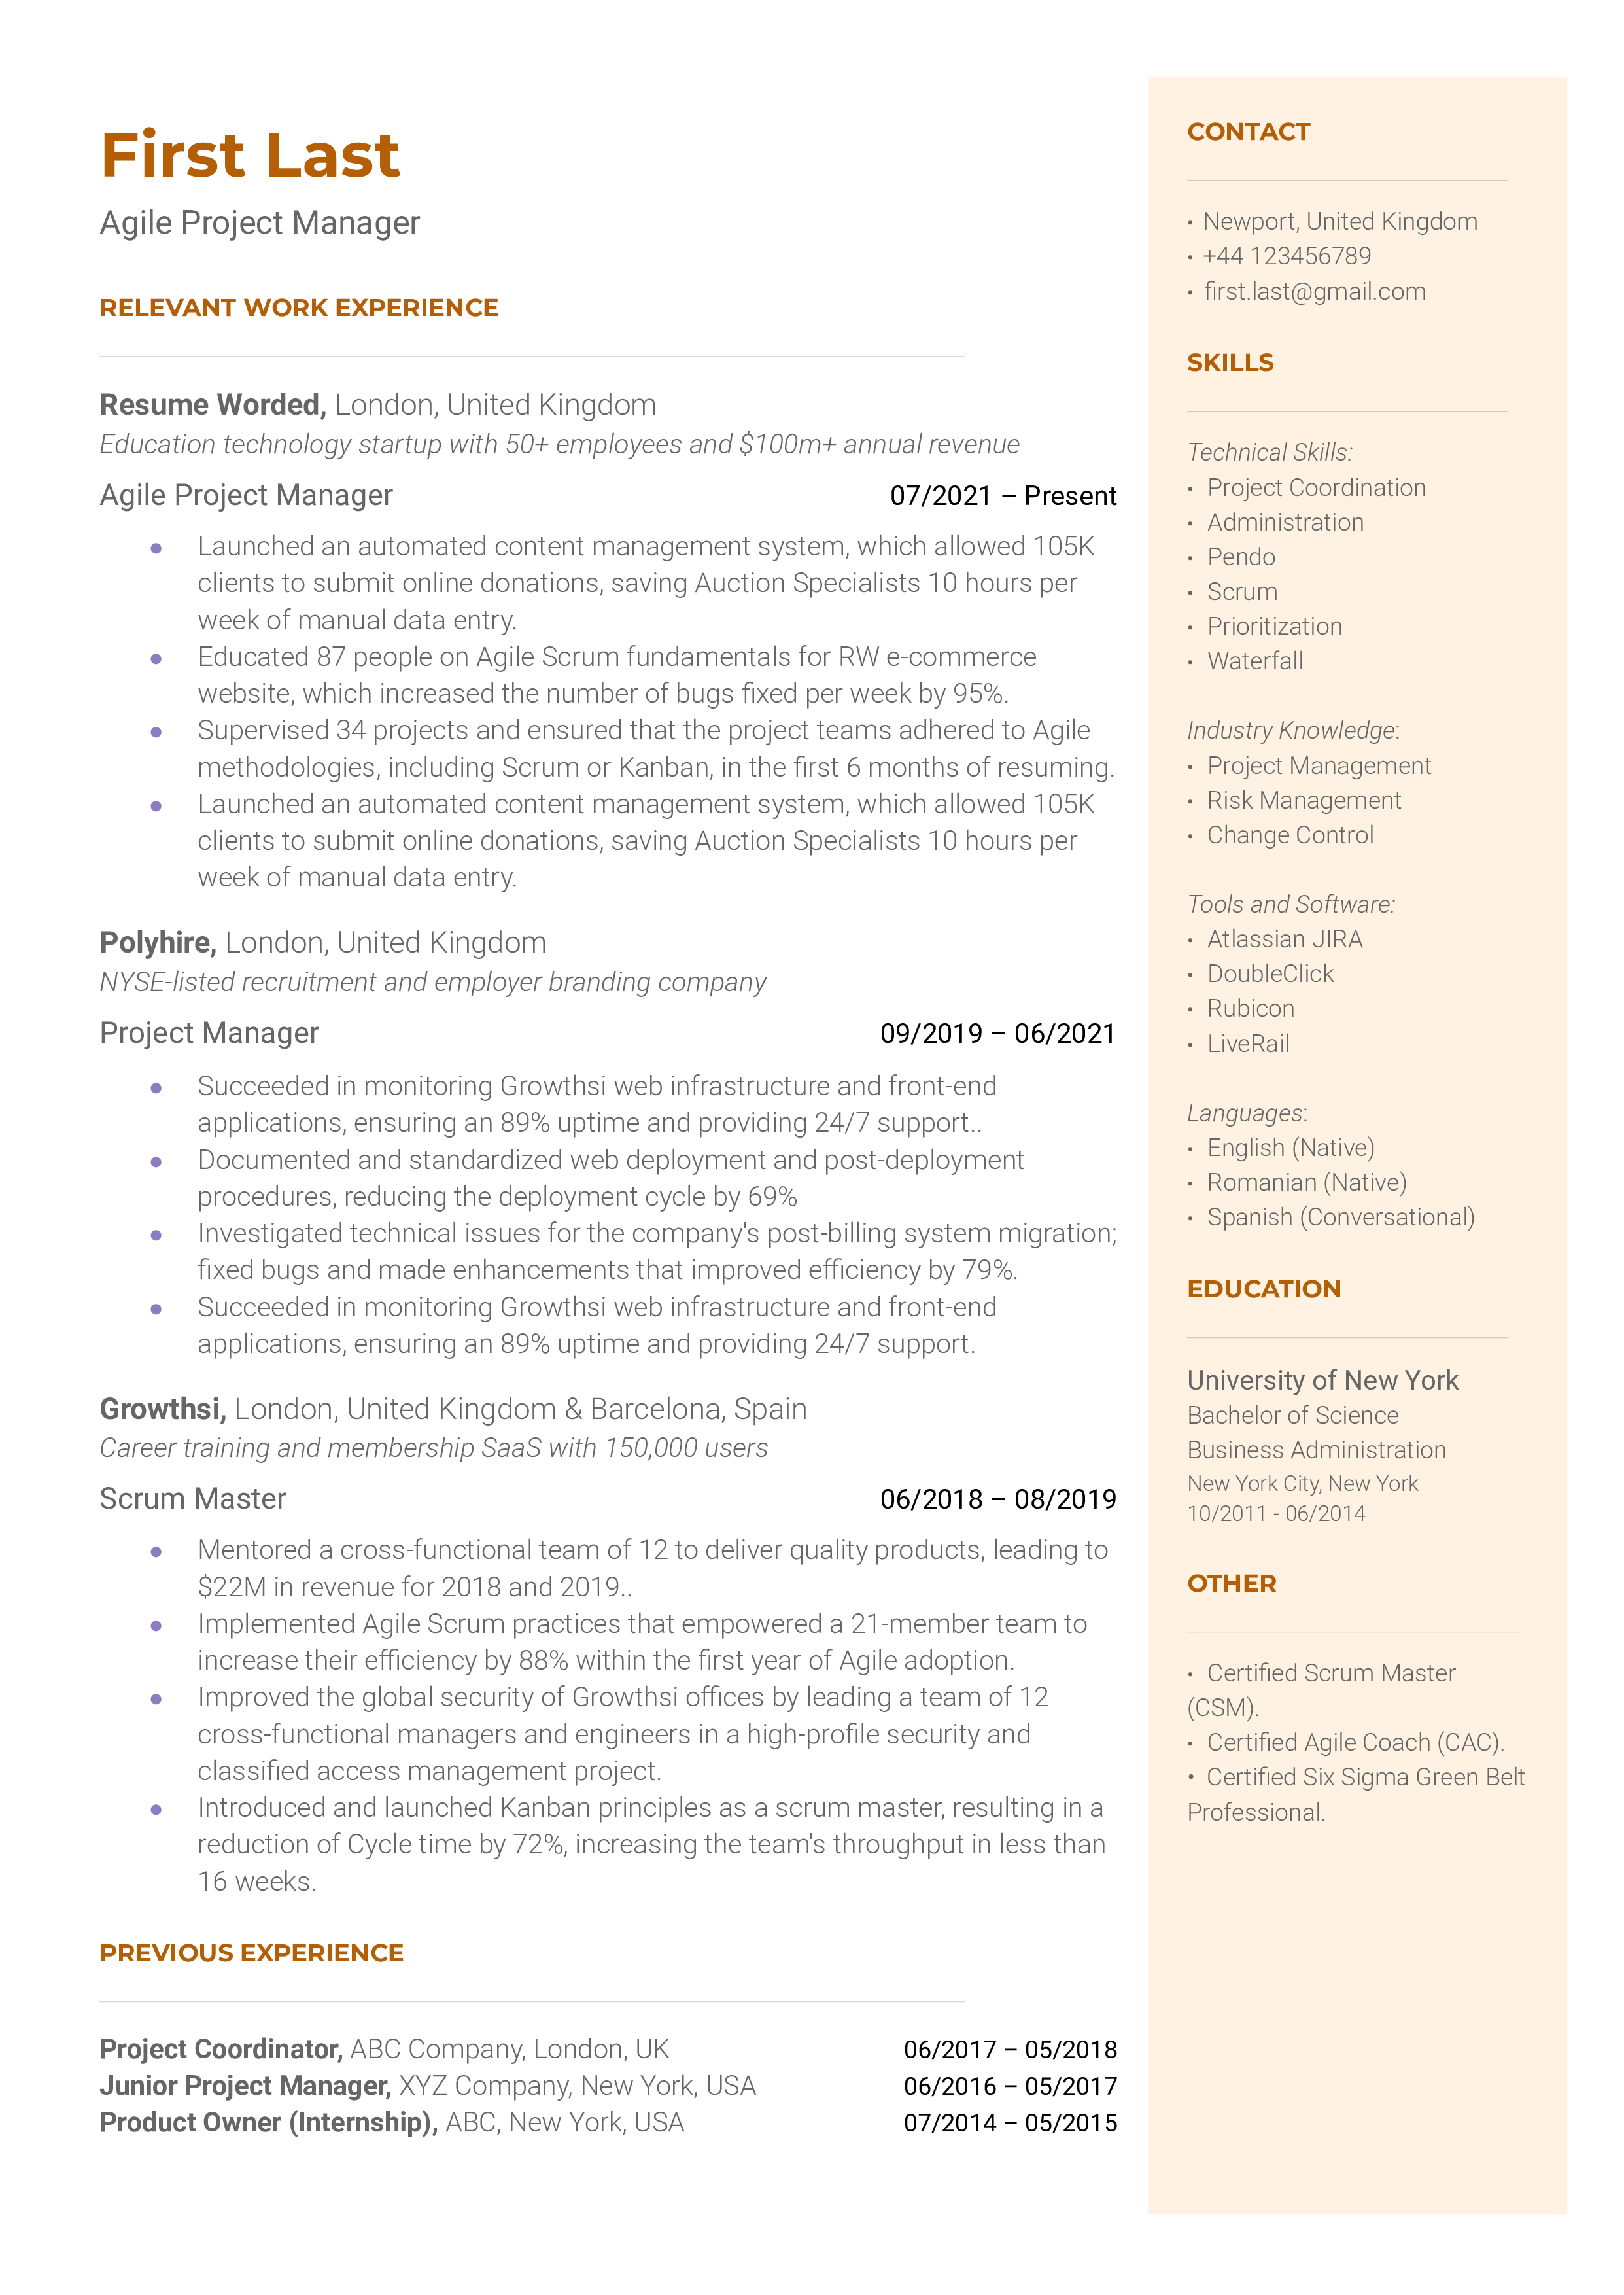 Agile Project Manager Resume Sample